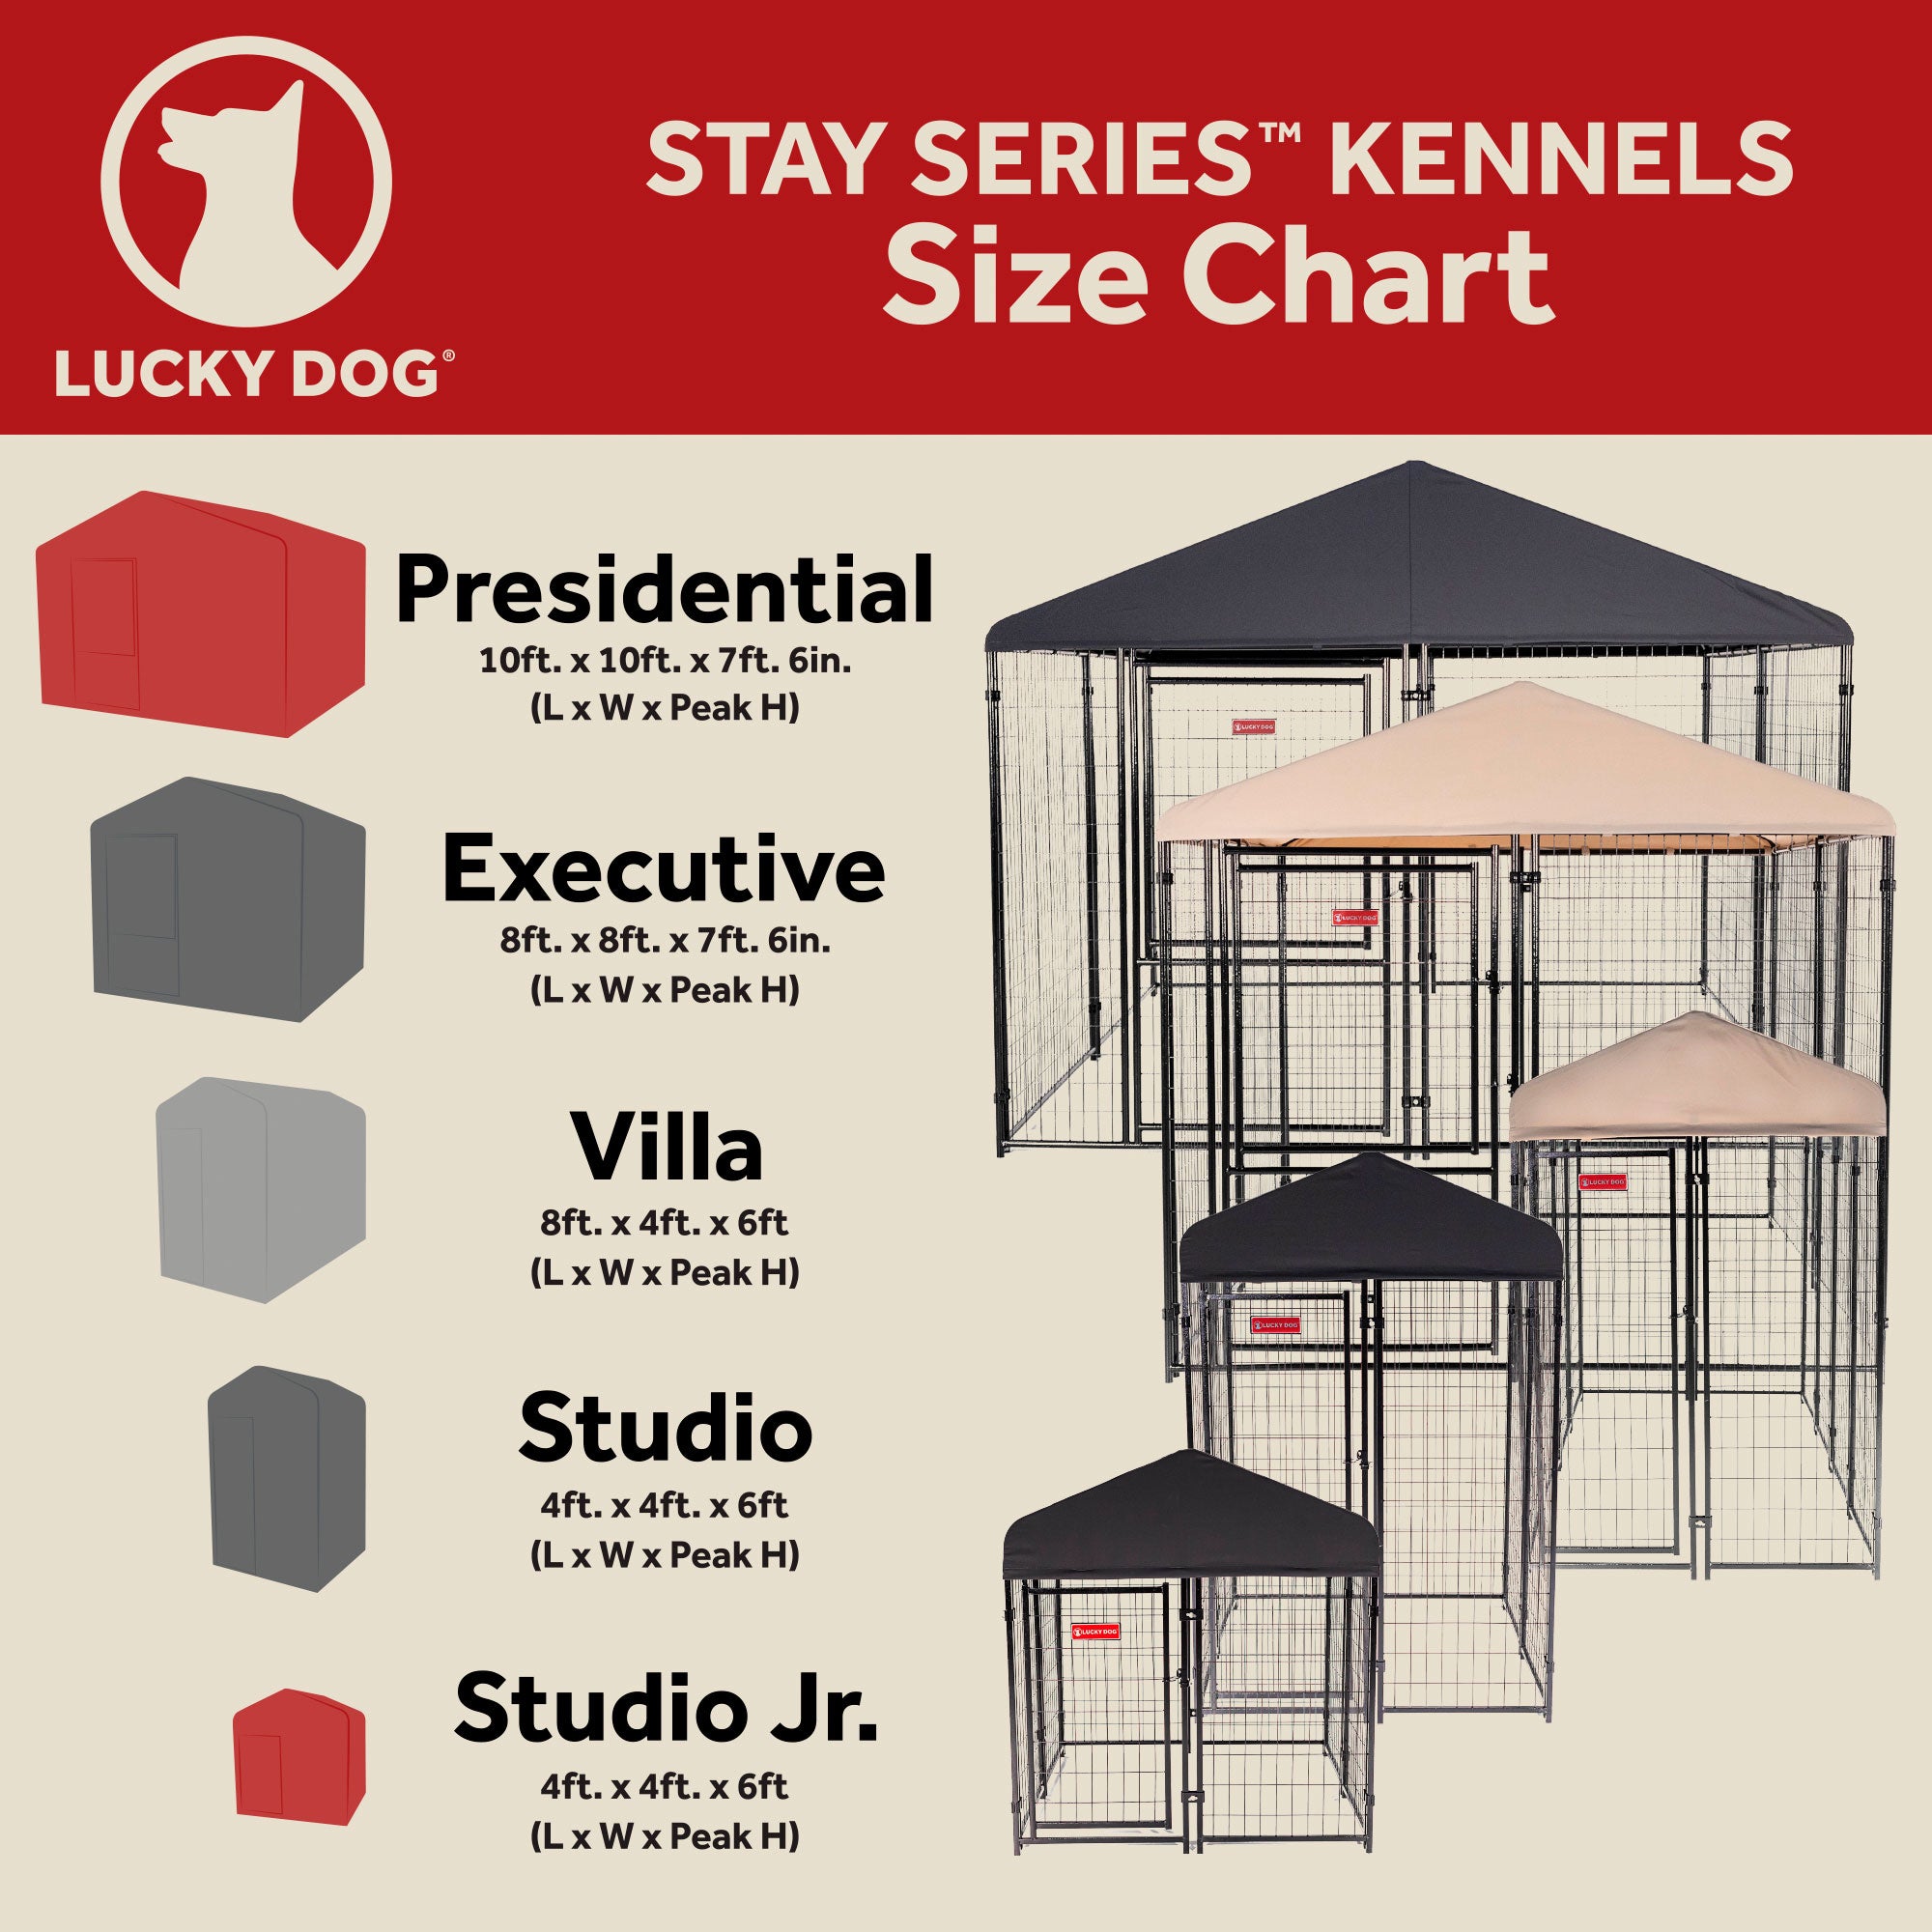 Lucky Dog STAY Series 4 x 8 x 6 Foot Roofed Steel Frame Villa Dog Kennel